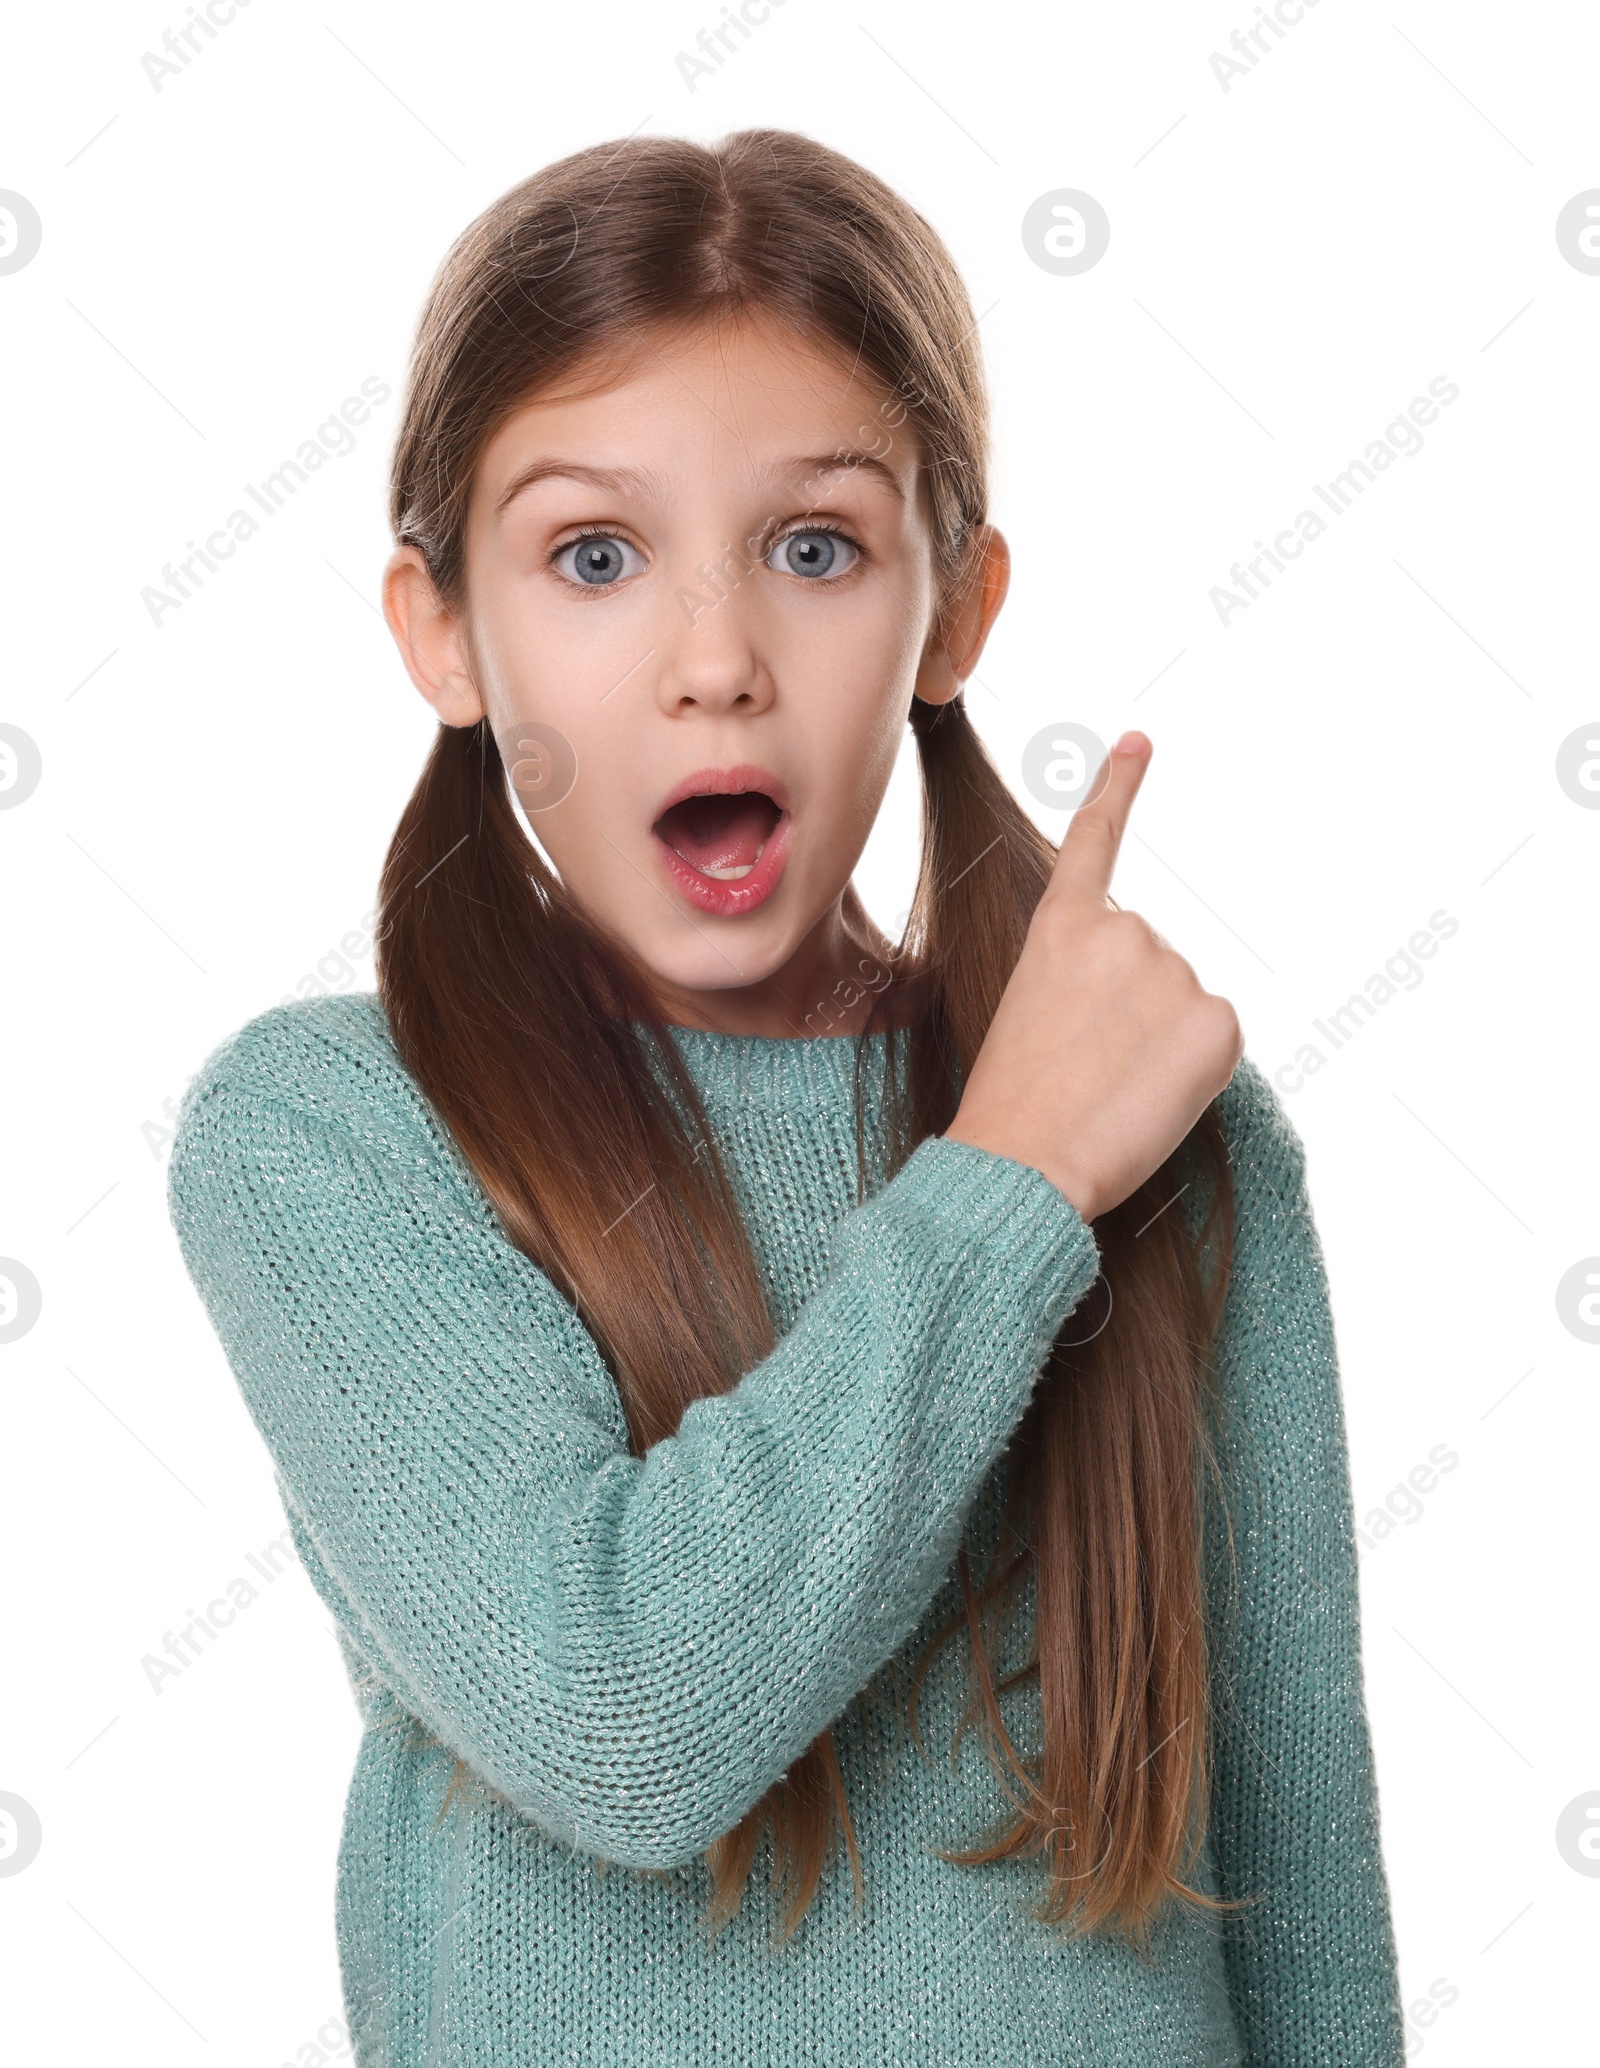 Photo of Surprised girl pointing at something on white background